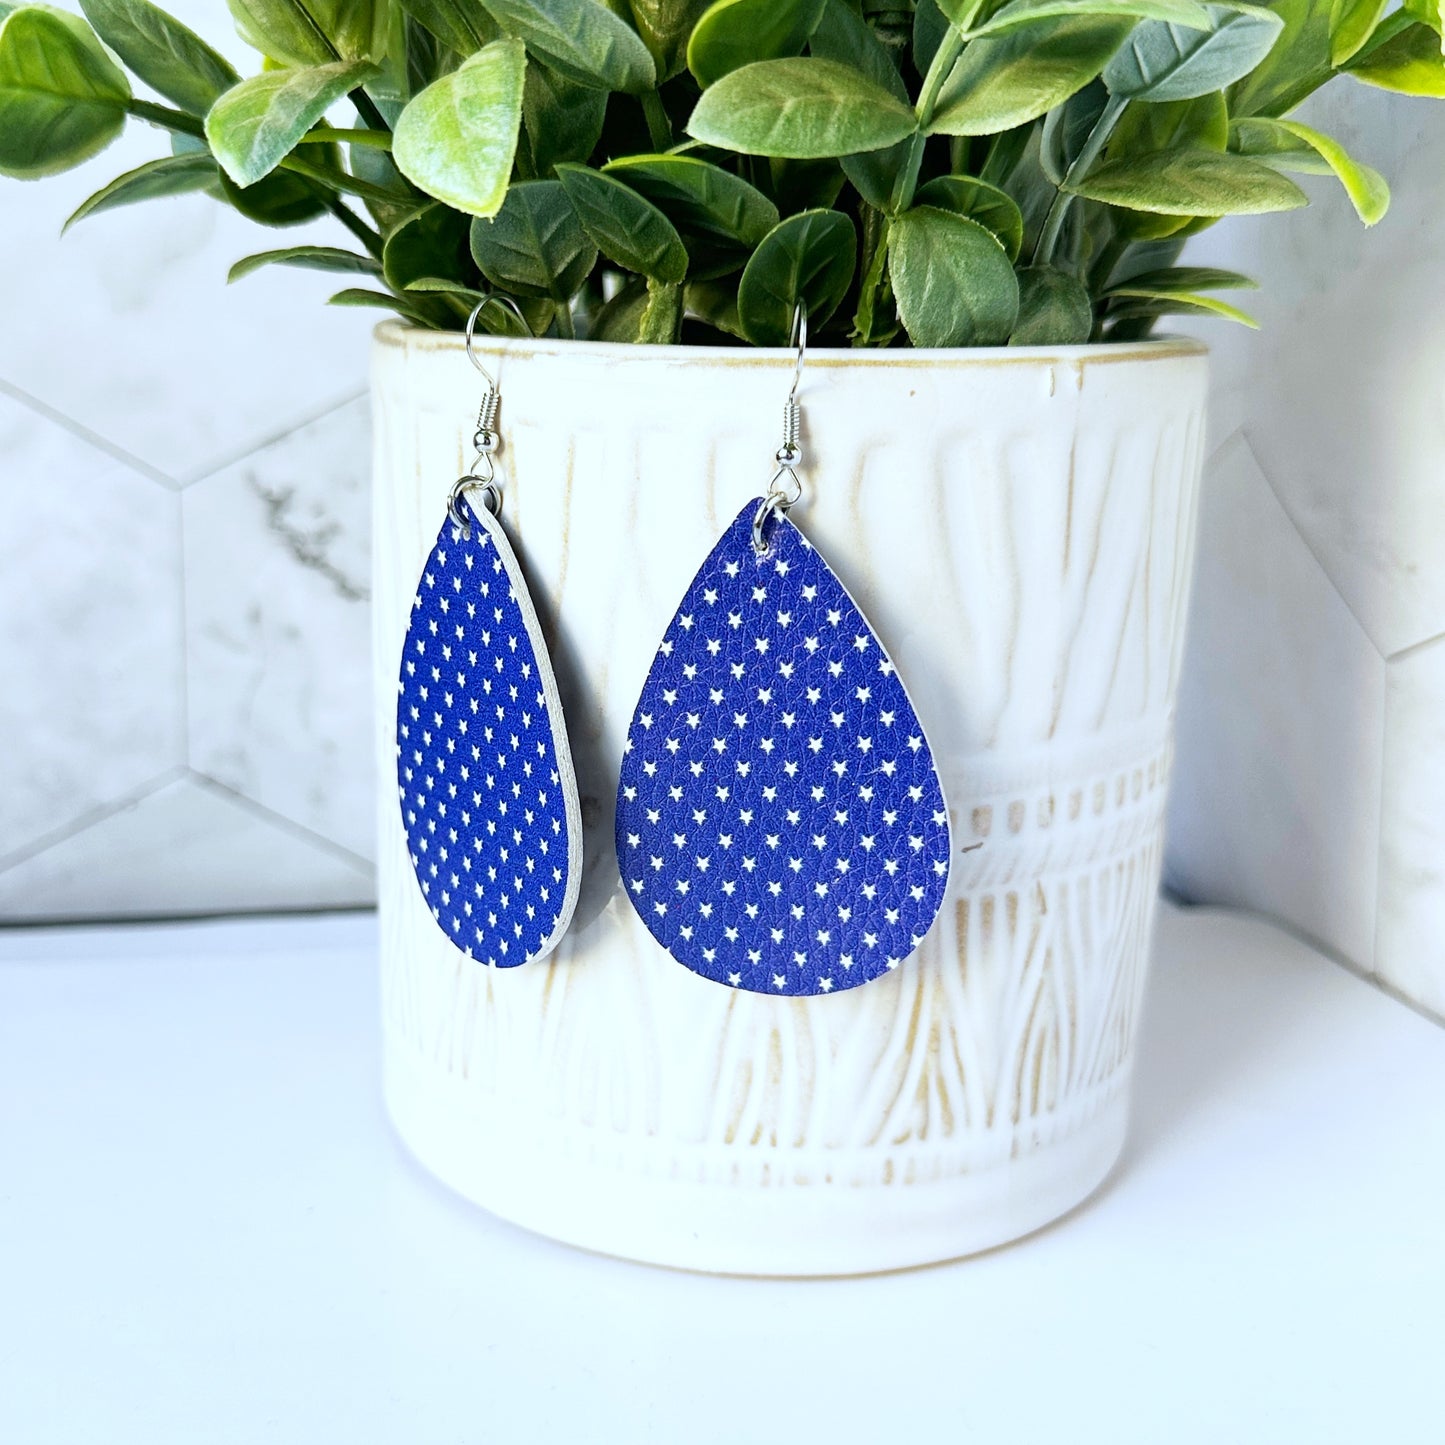 Penelope - Navy Blue with Stars Patriotic 4th of July earrings